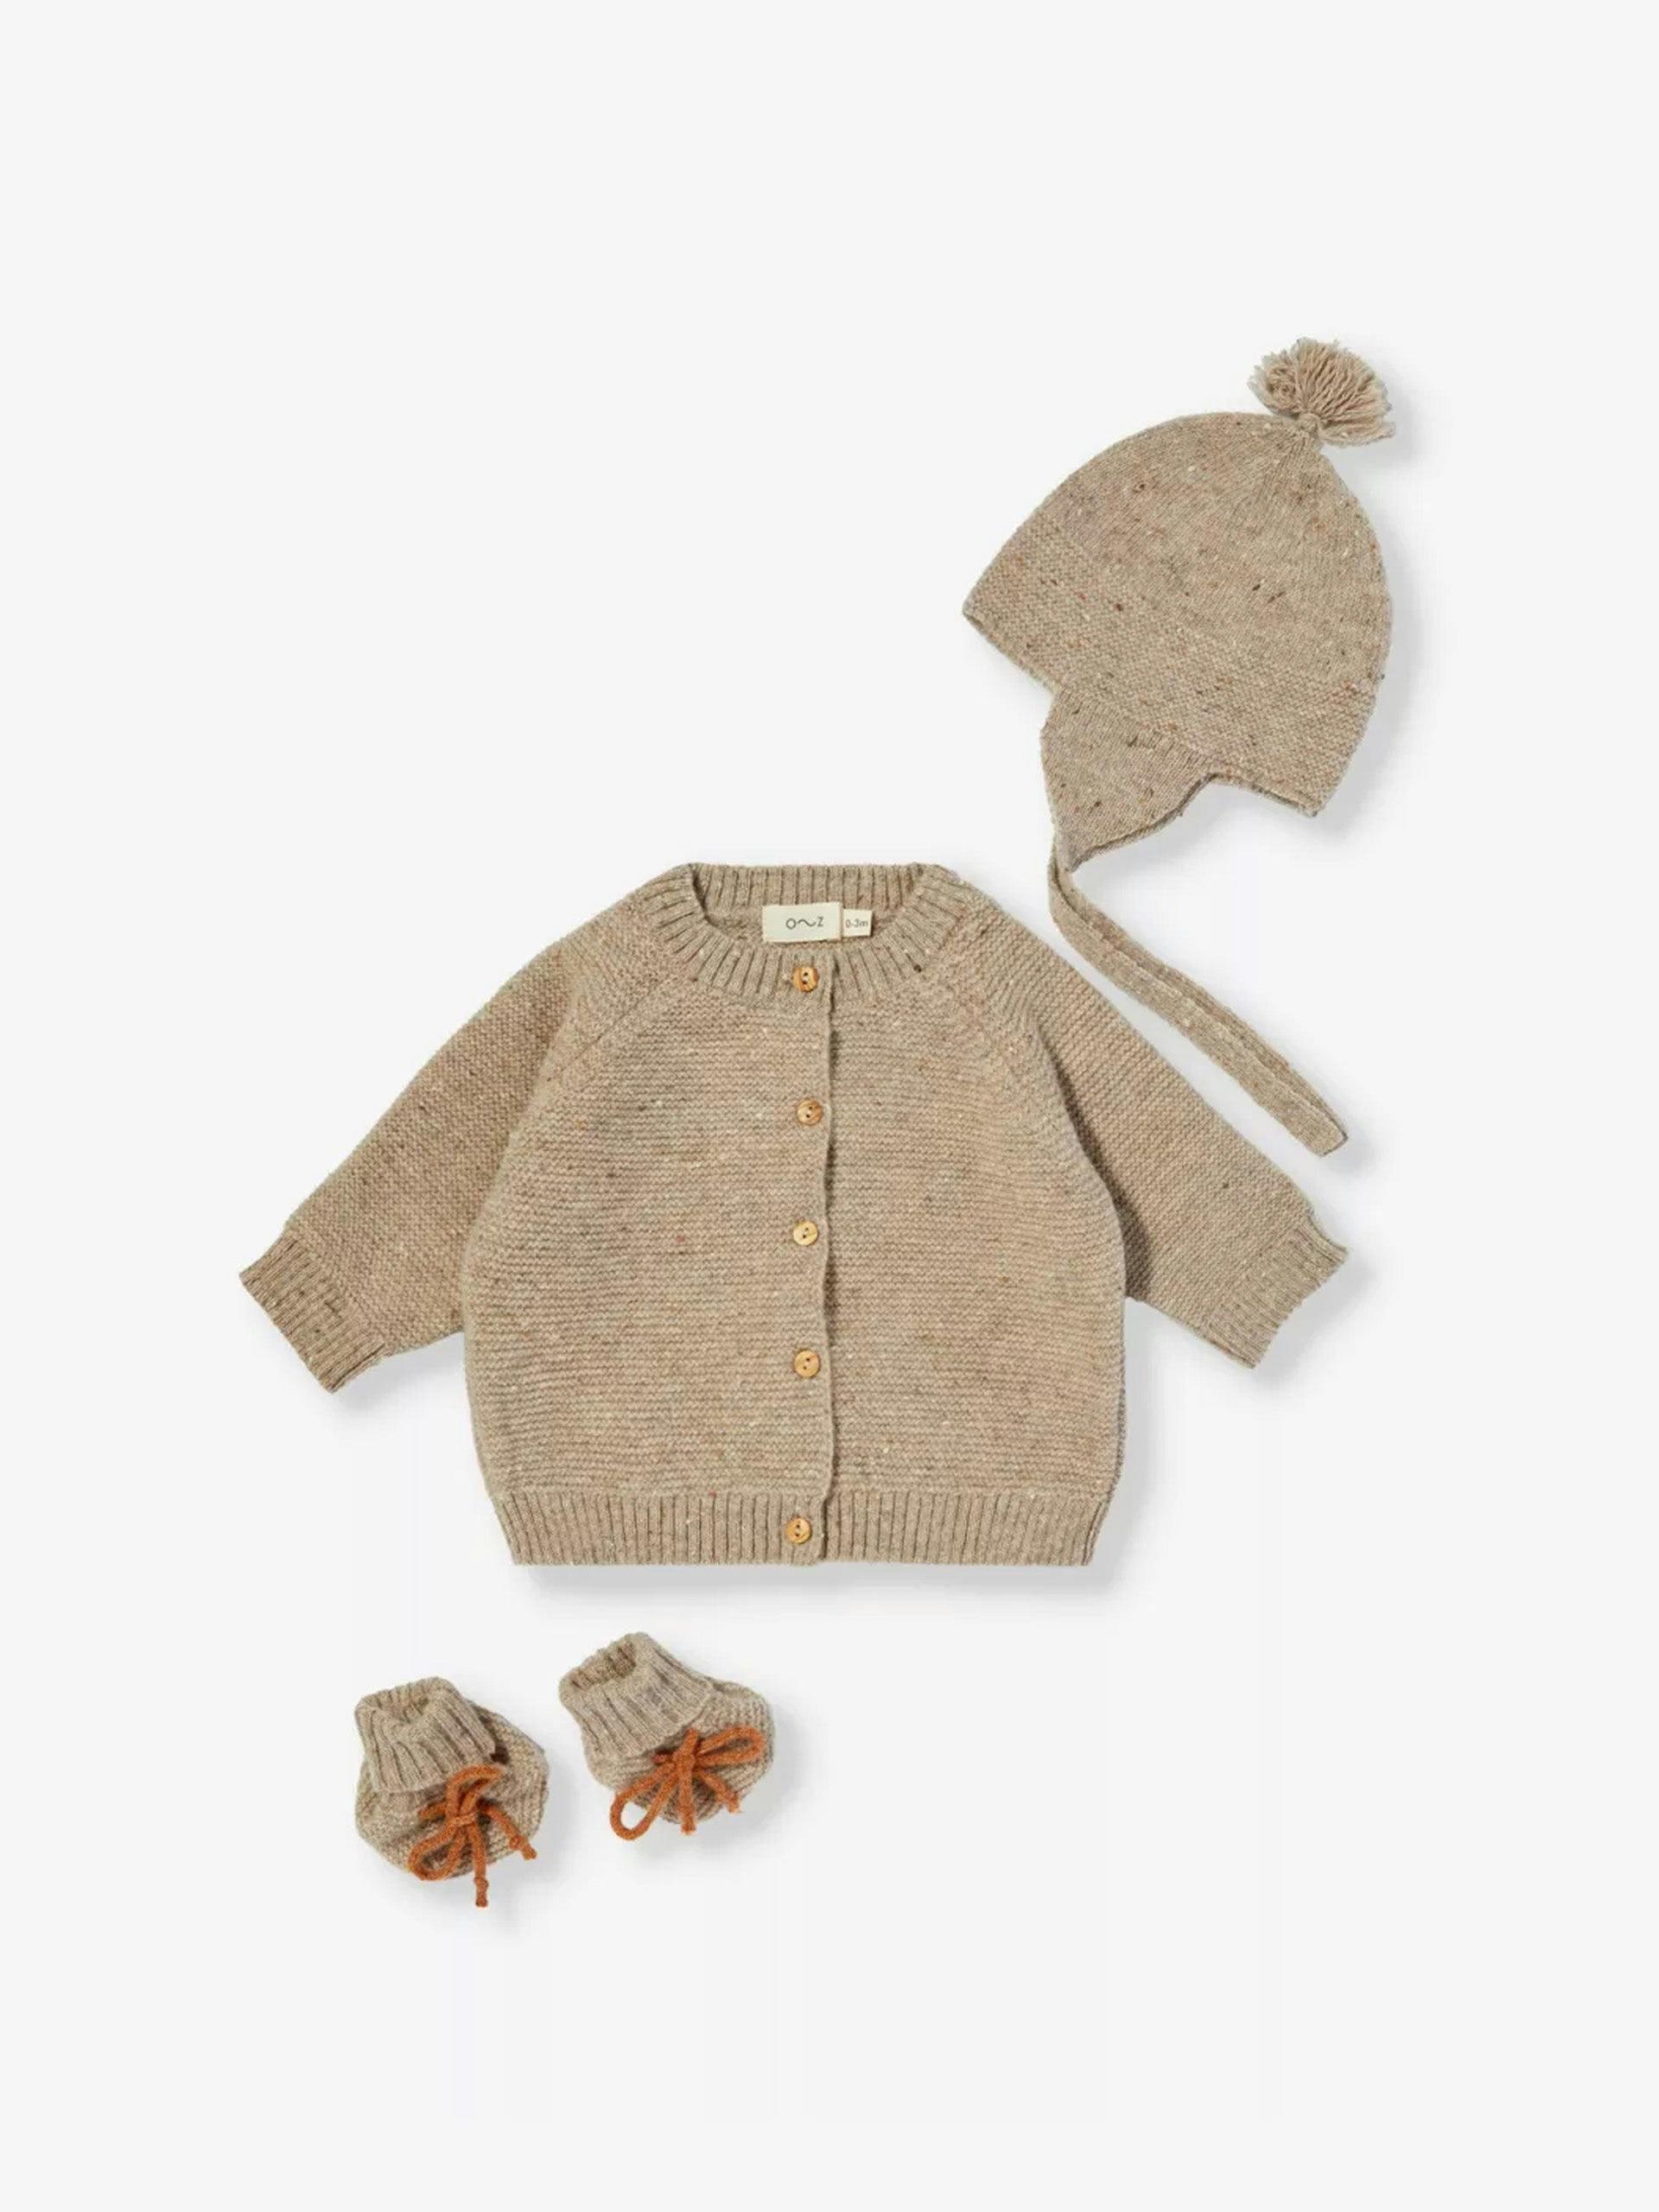 Oatmeal knitted wool gift set (3-piece)